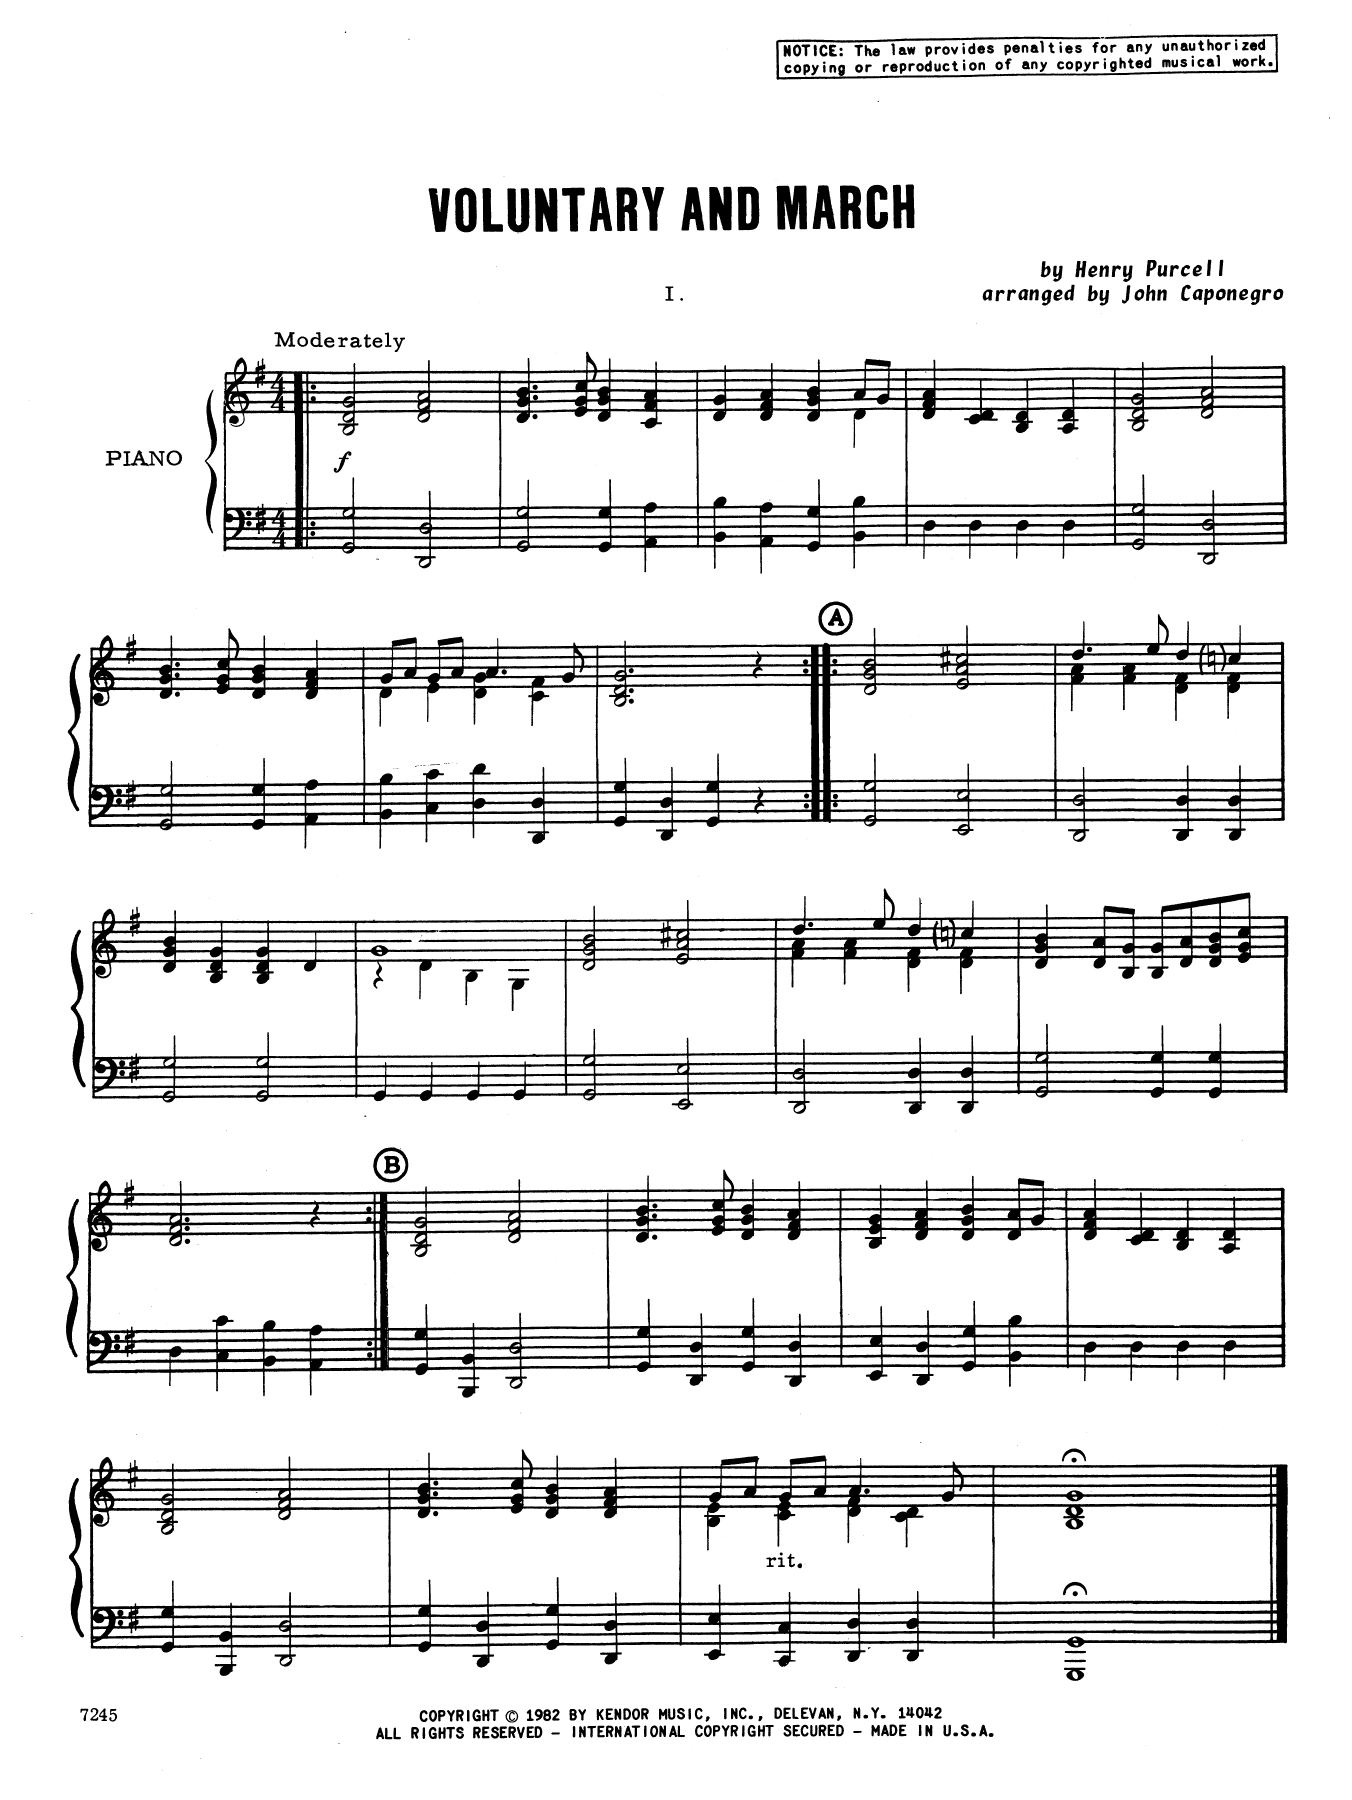 Download John Caponegro Voluntary and March - Piano Accompanime Sheet Music